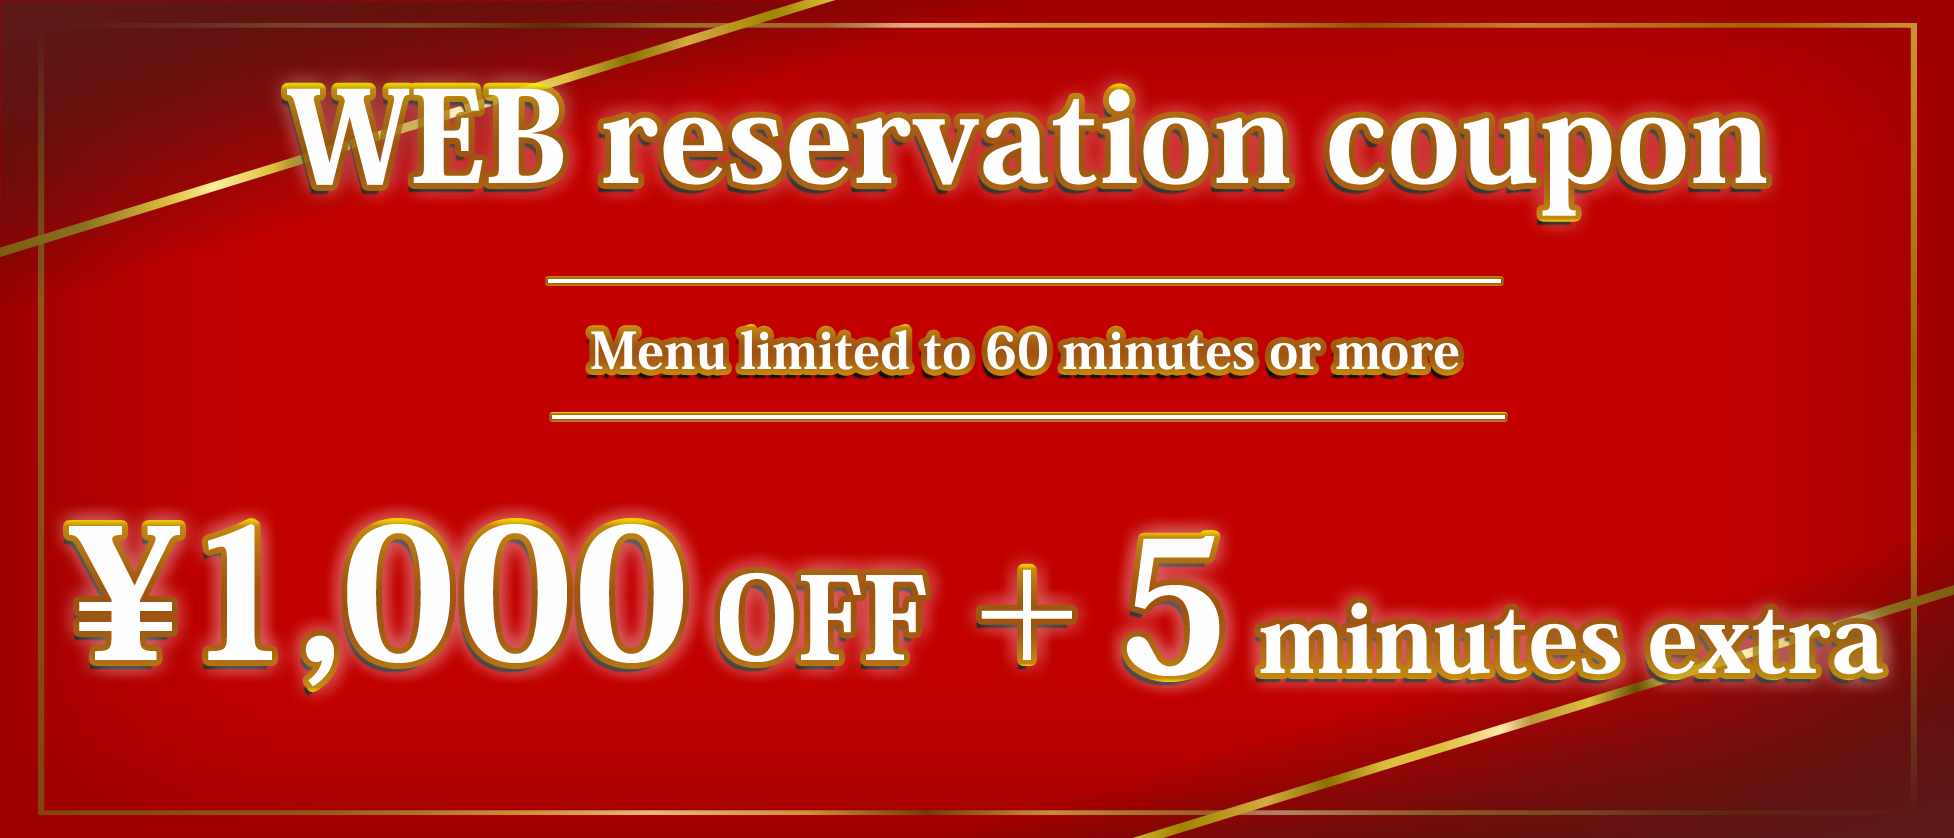 Link to web reservation. Menus lasting over 60 minutes will receive a 1,000 yen discount and an additional 5 minutes.